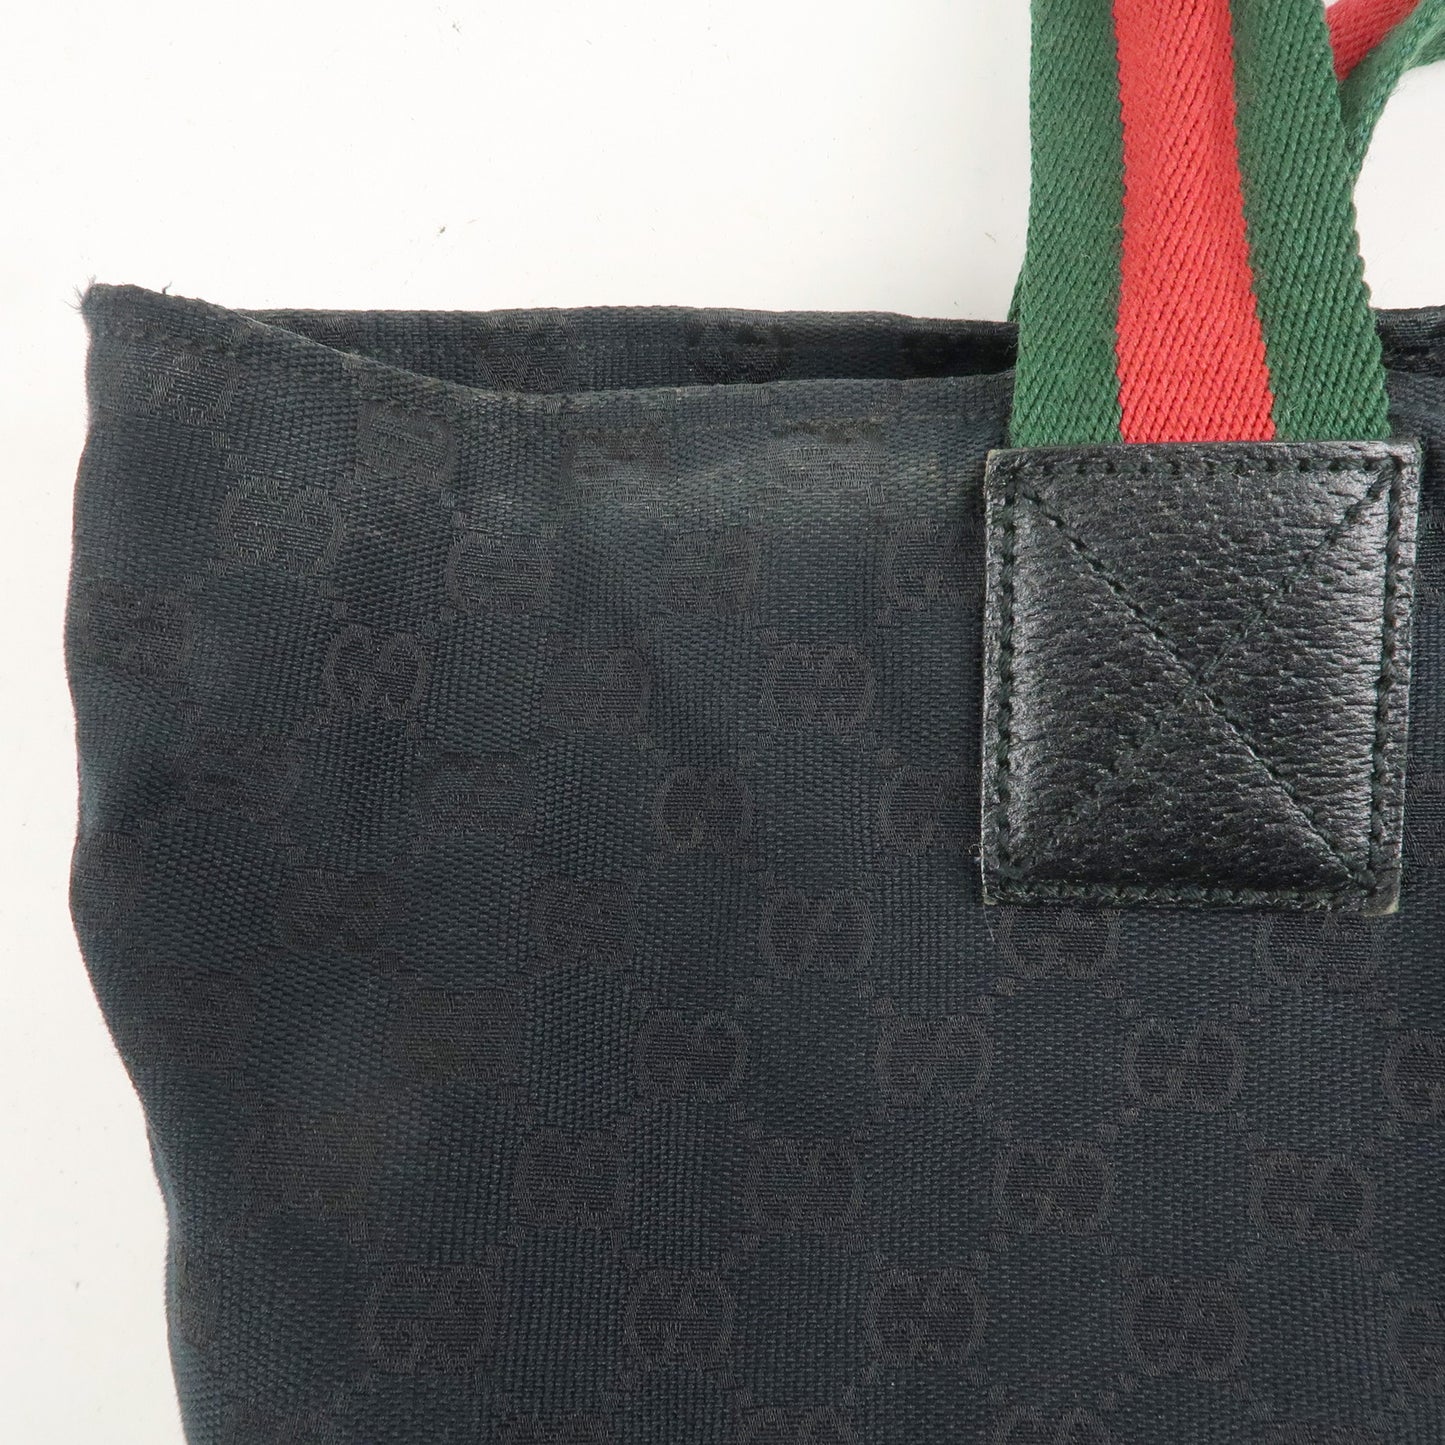 GUCCI Sherry GG Canvas Leather Tote Bag Hand Bag Black 131230